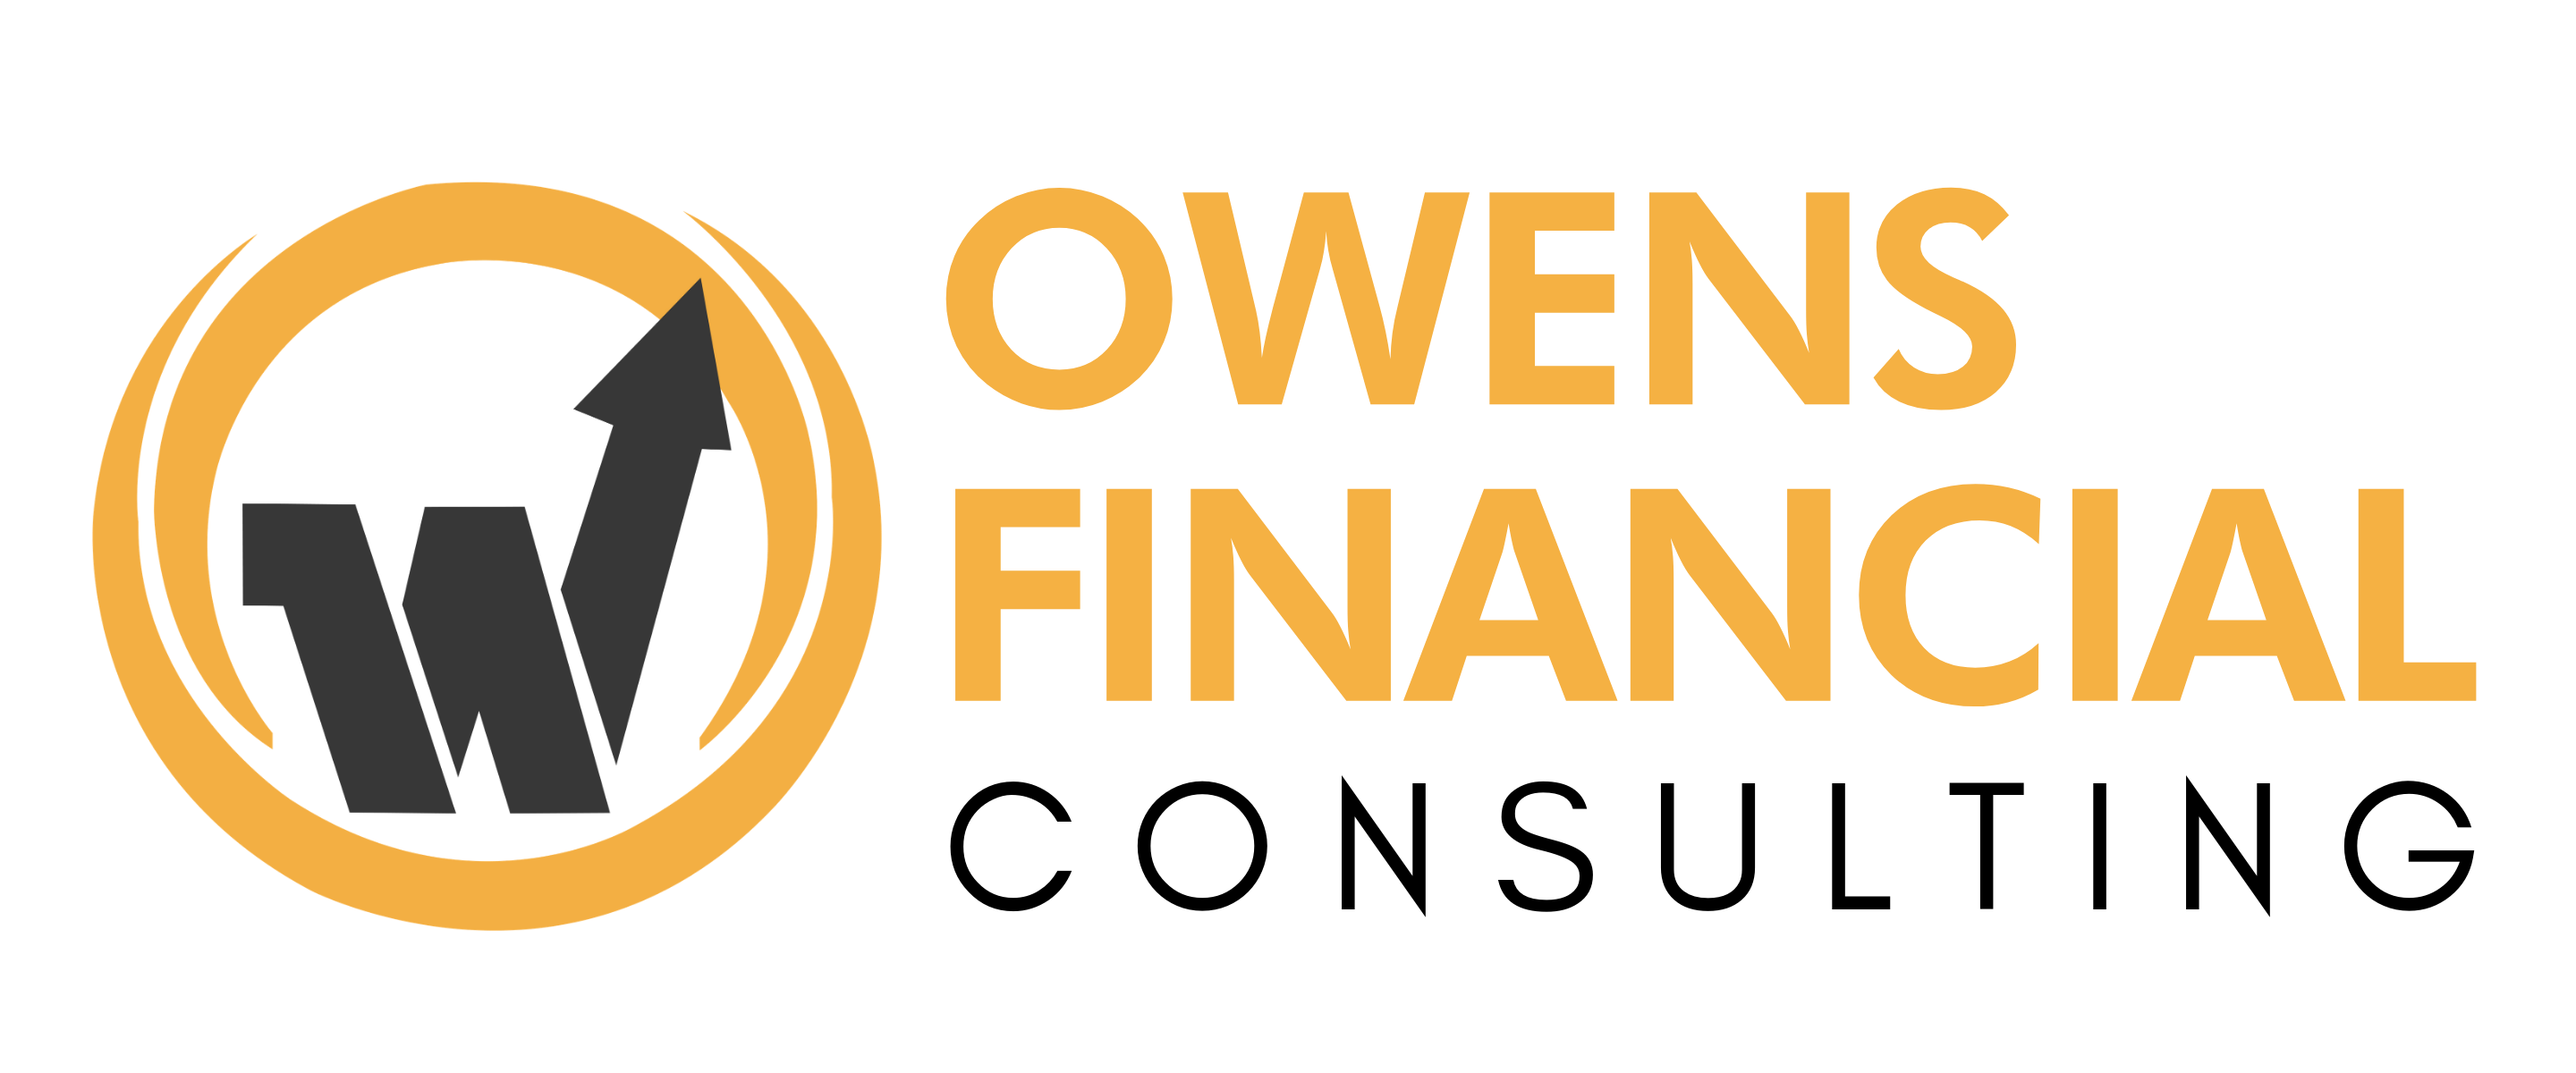 logo owens financial consulting